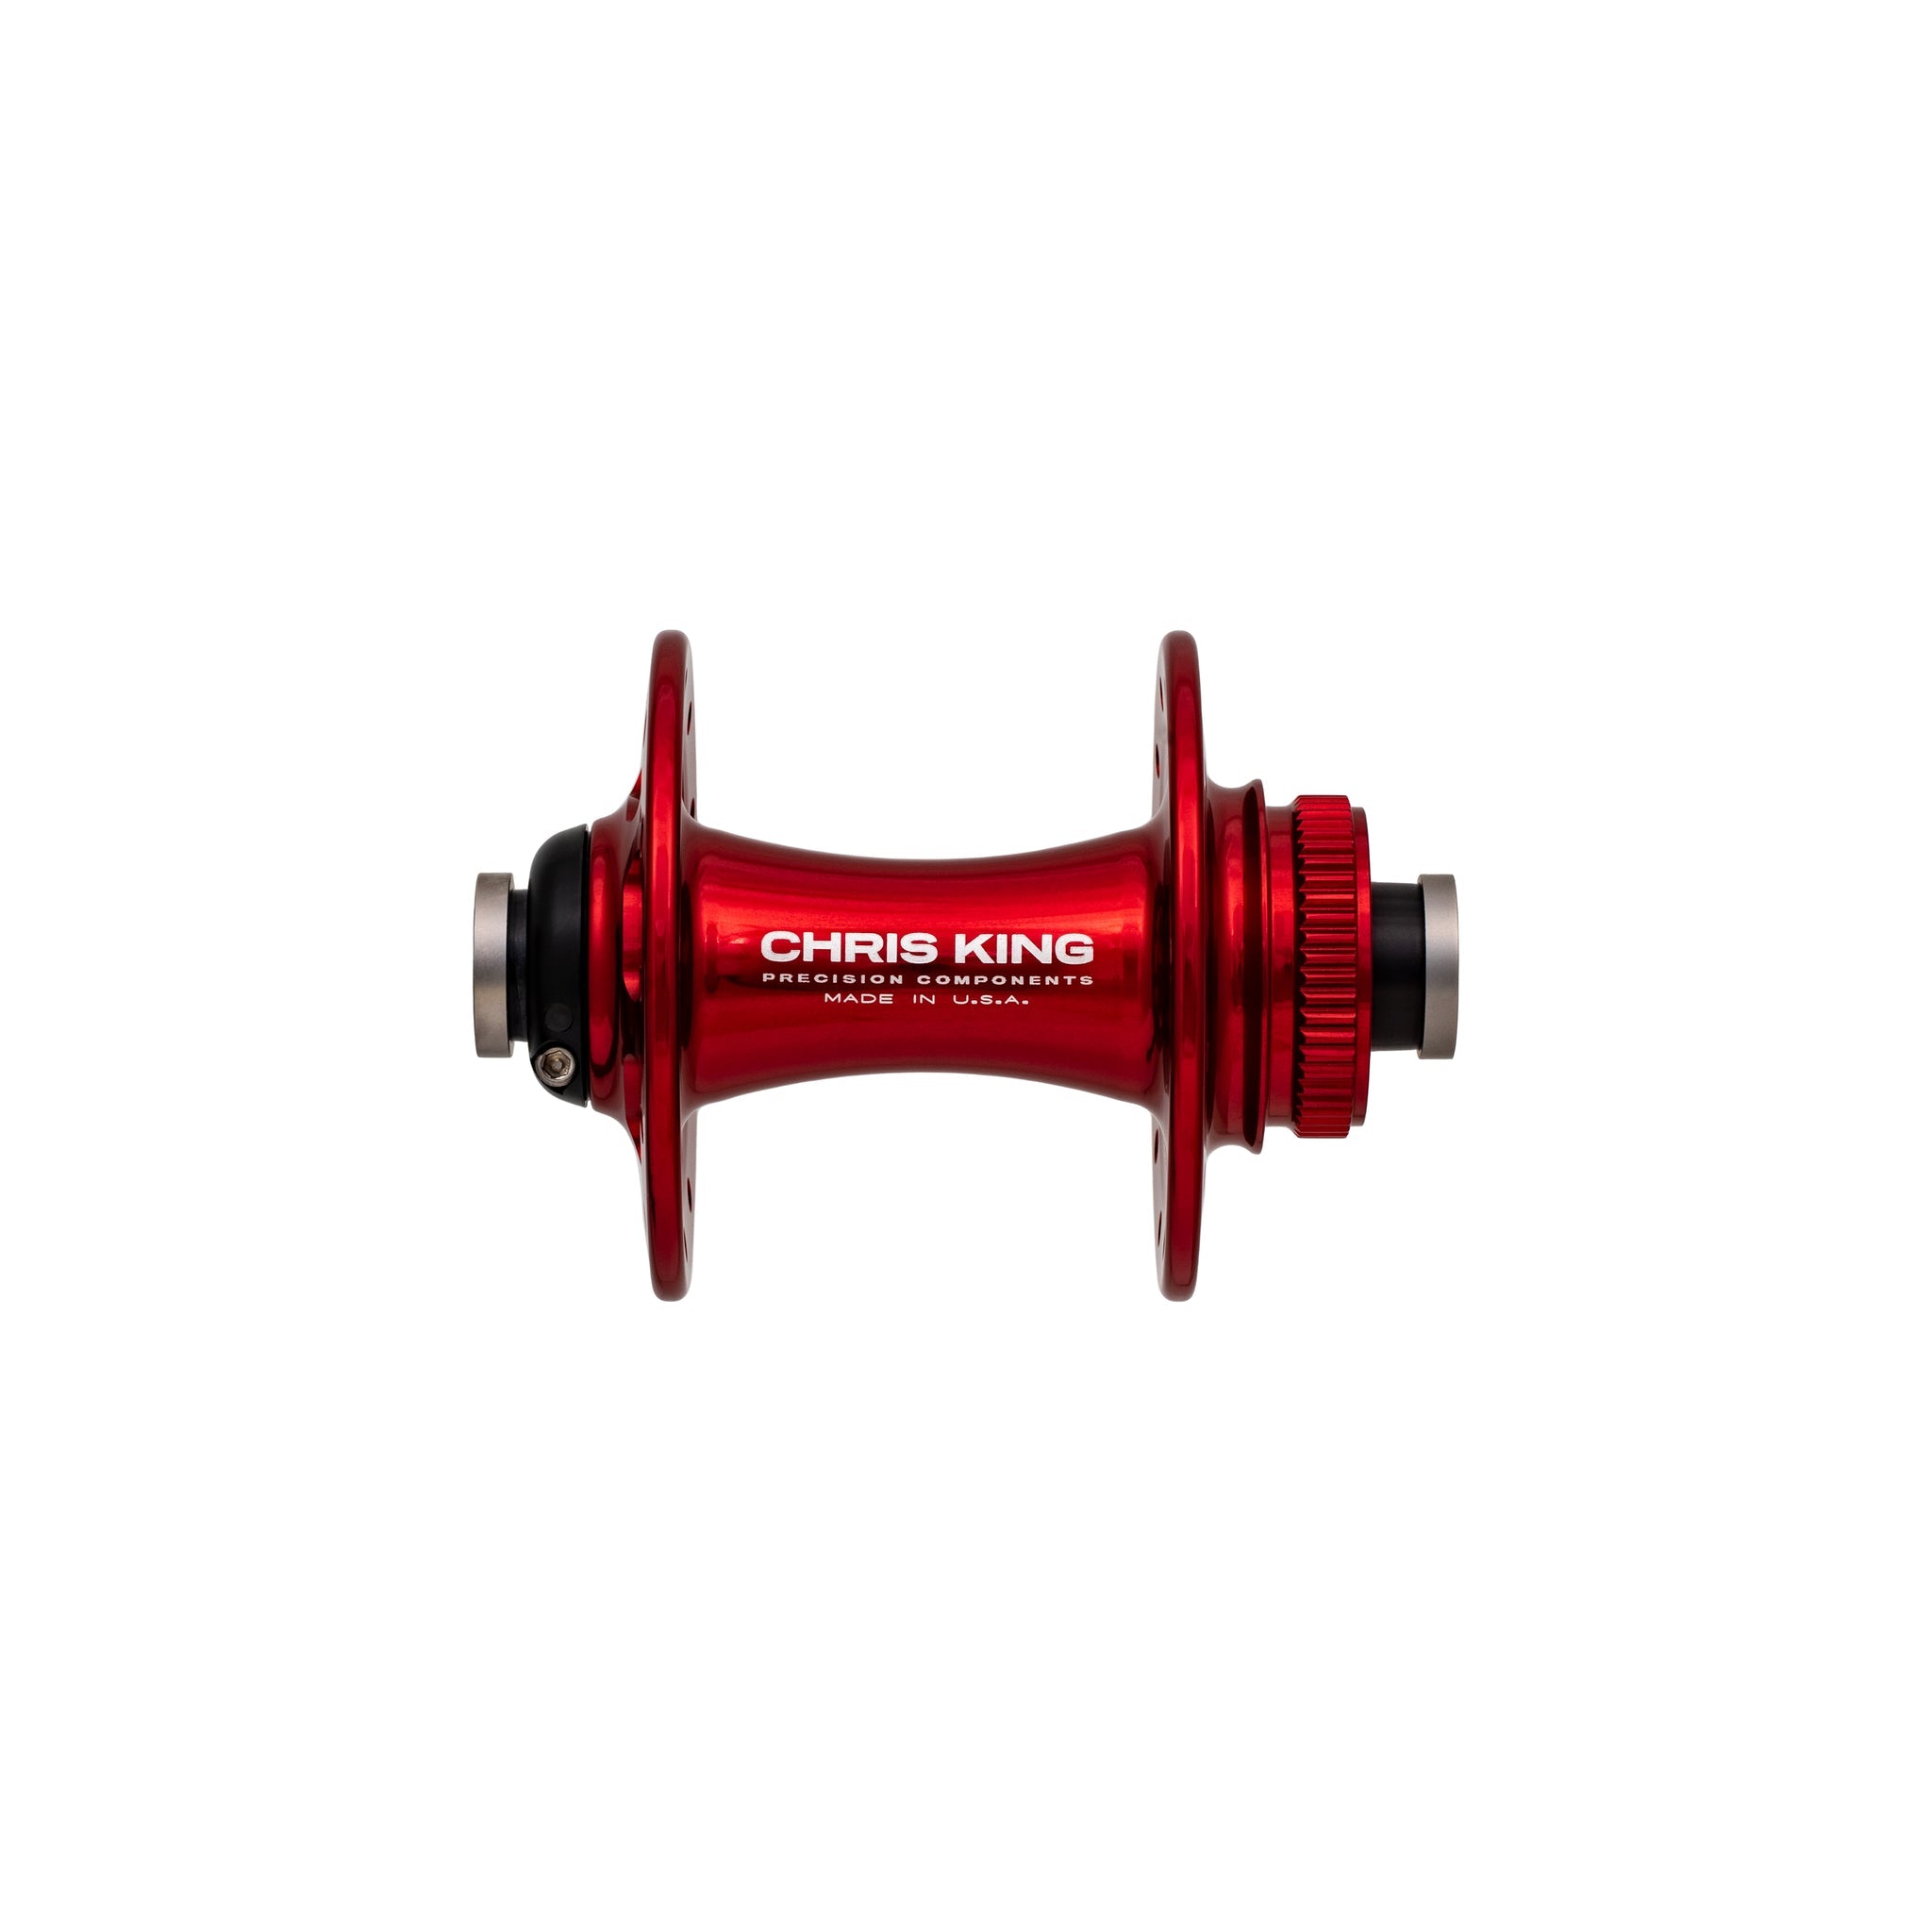 Chris king r4d front hub in red